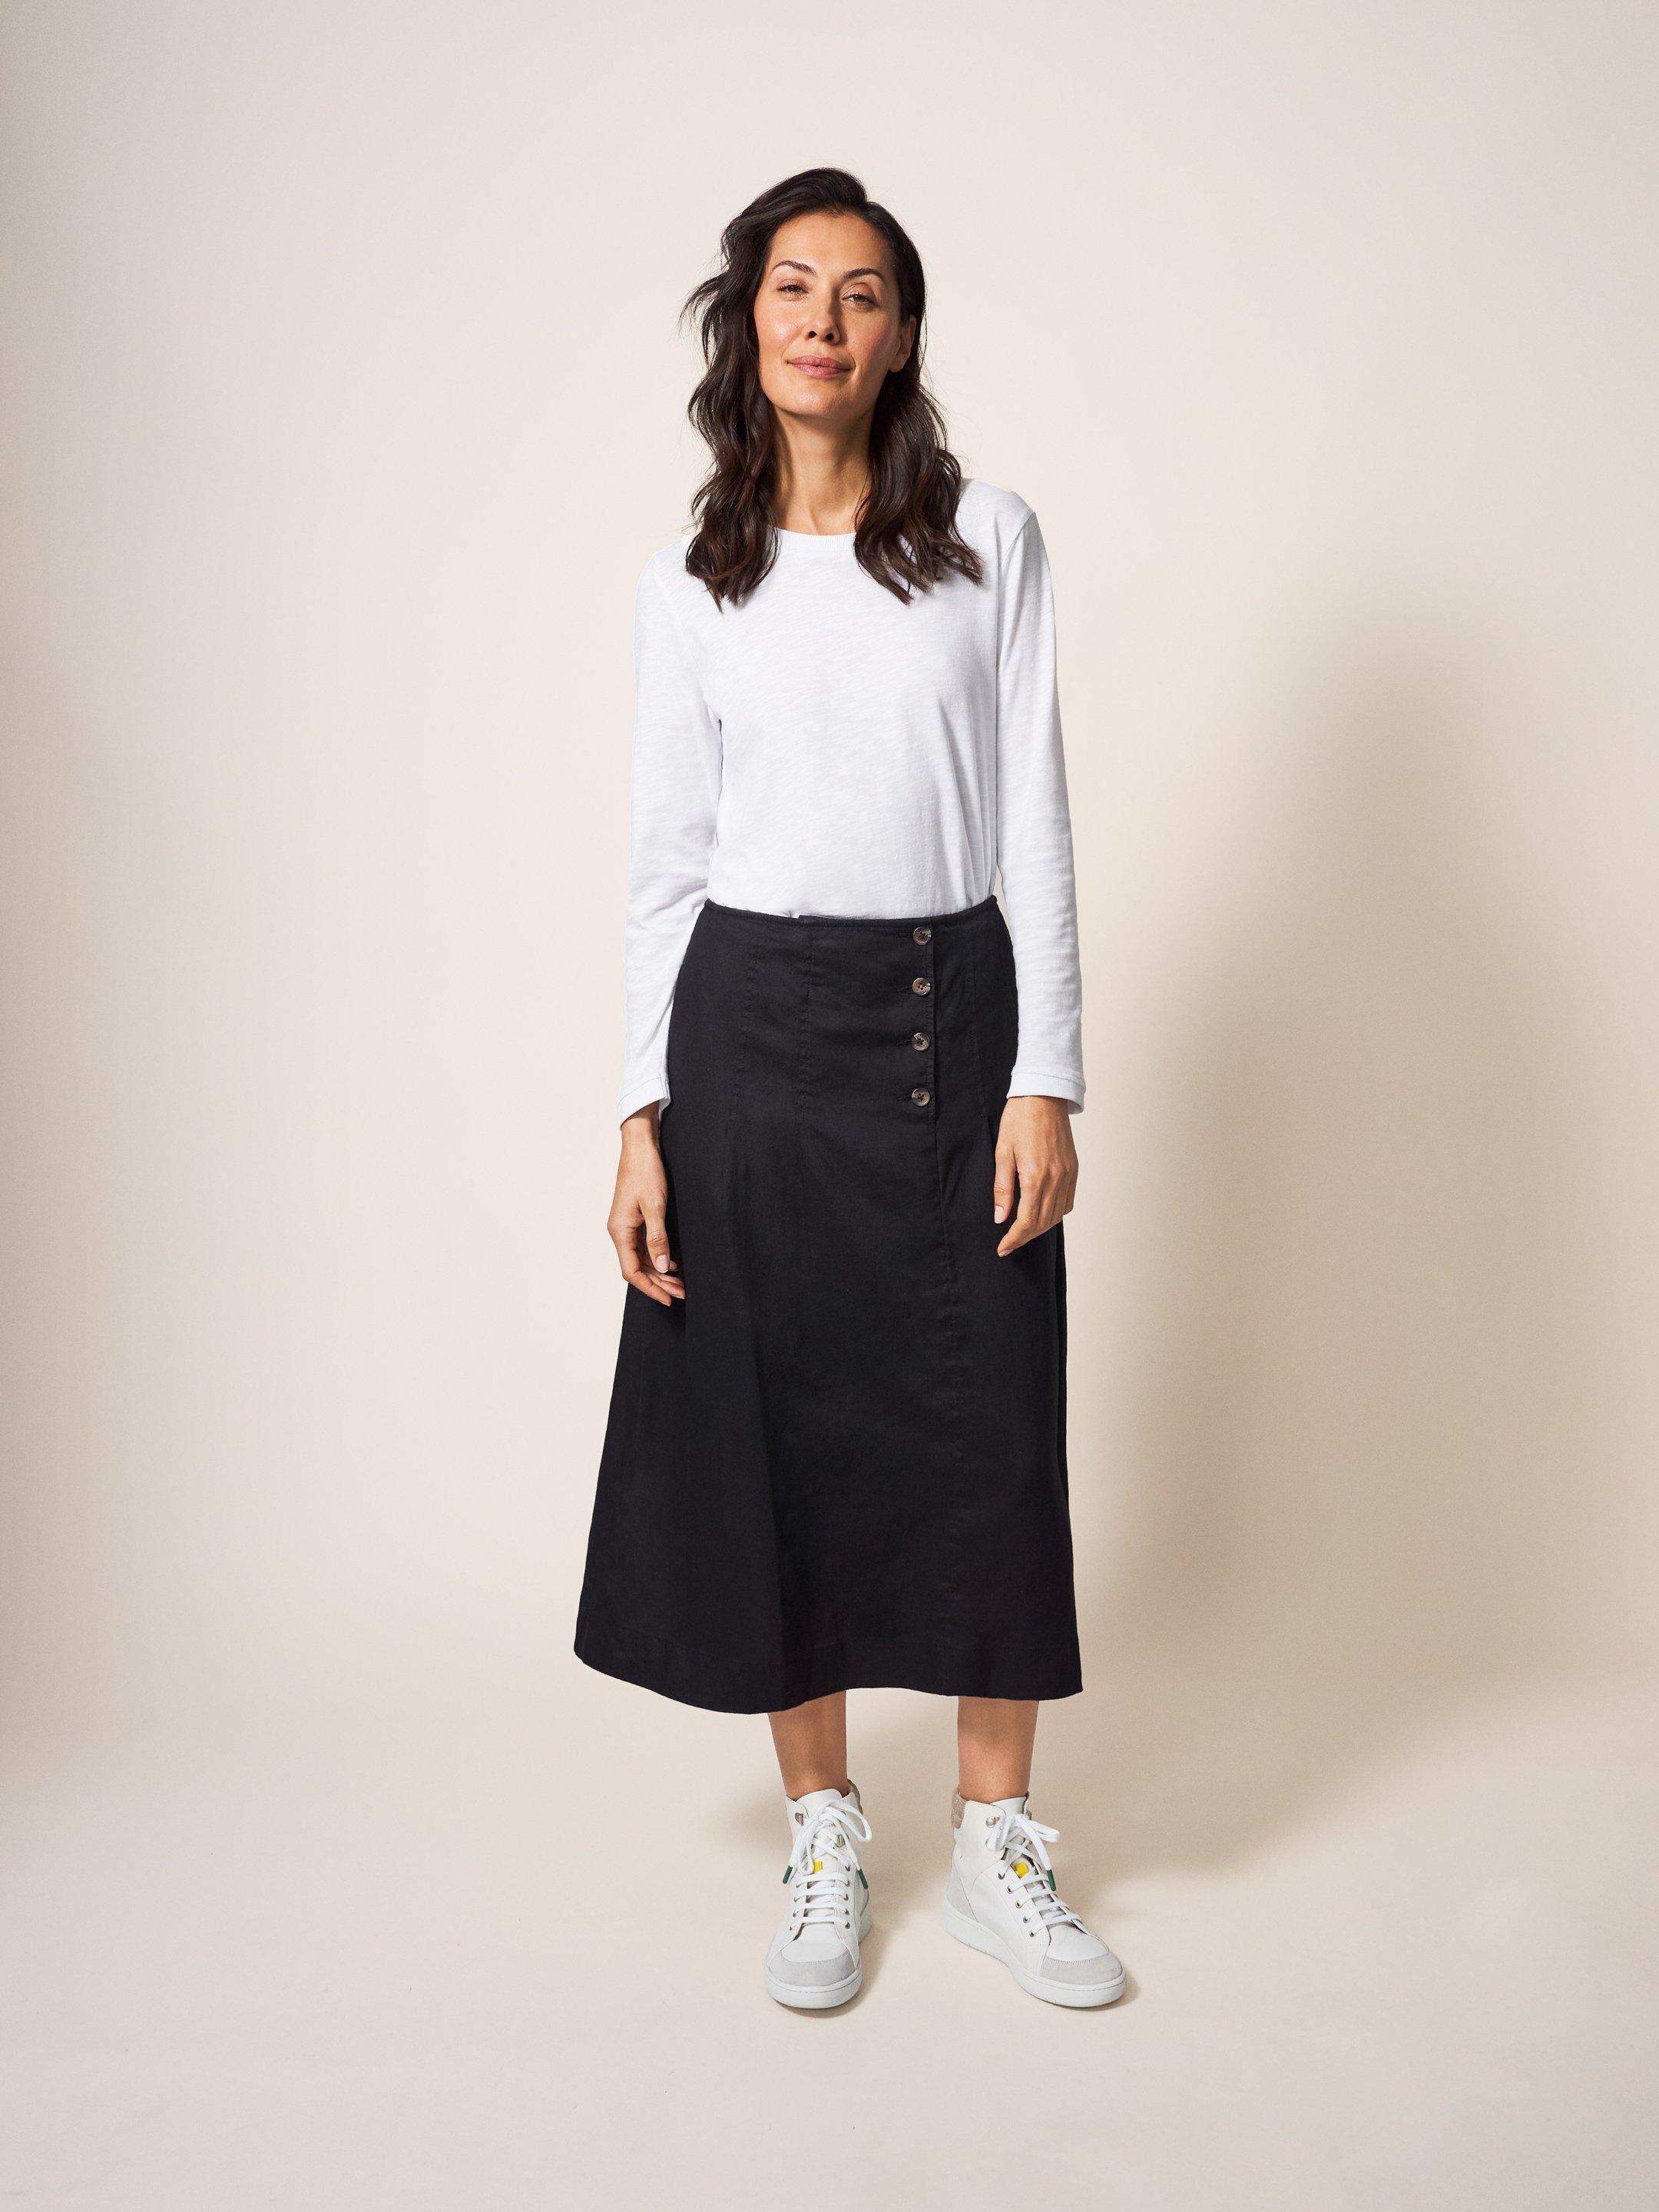 Ciara Linen Skirt in WASHED BLK - LIFESTYLE